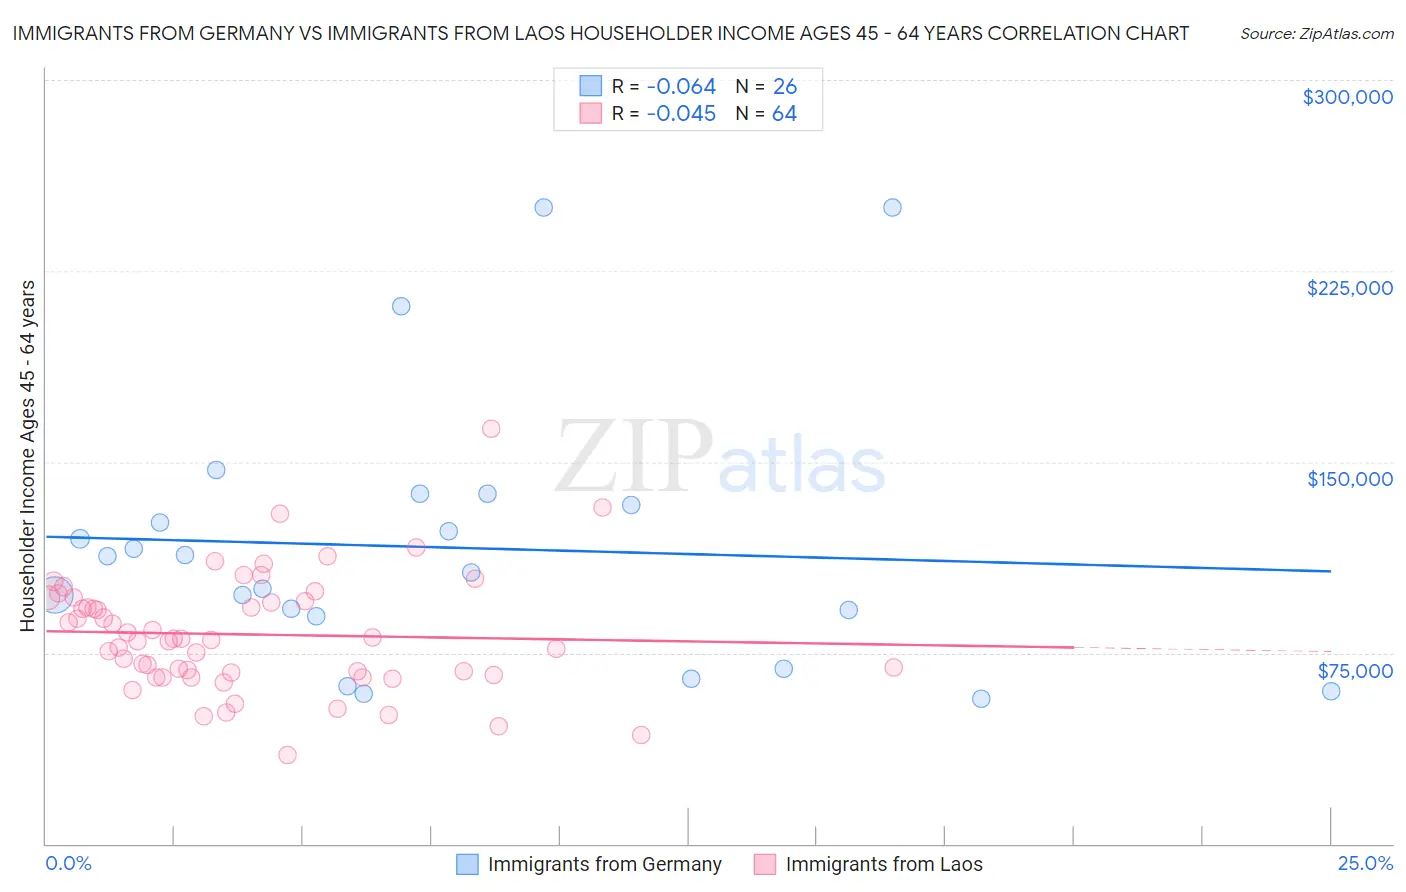 Immigrants from Germany vs Immigrants from Laos Householder Income Ages 45 - 64 years